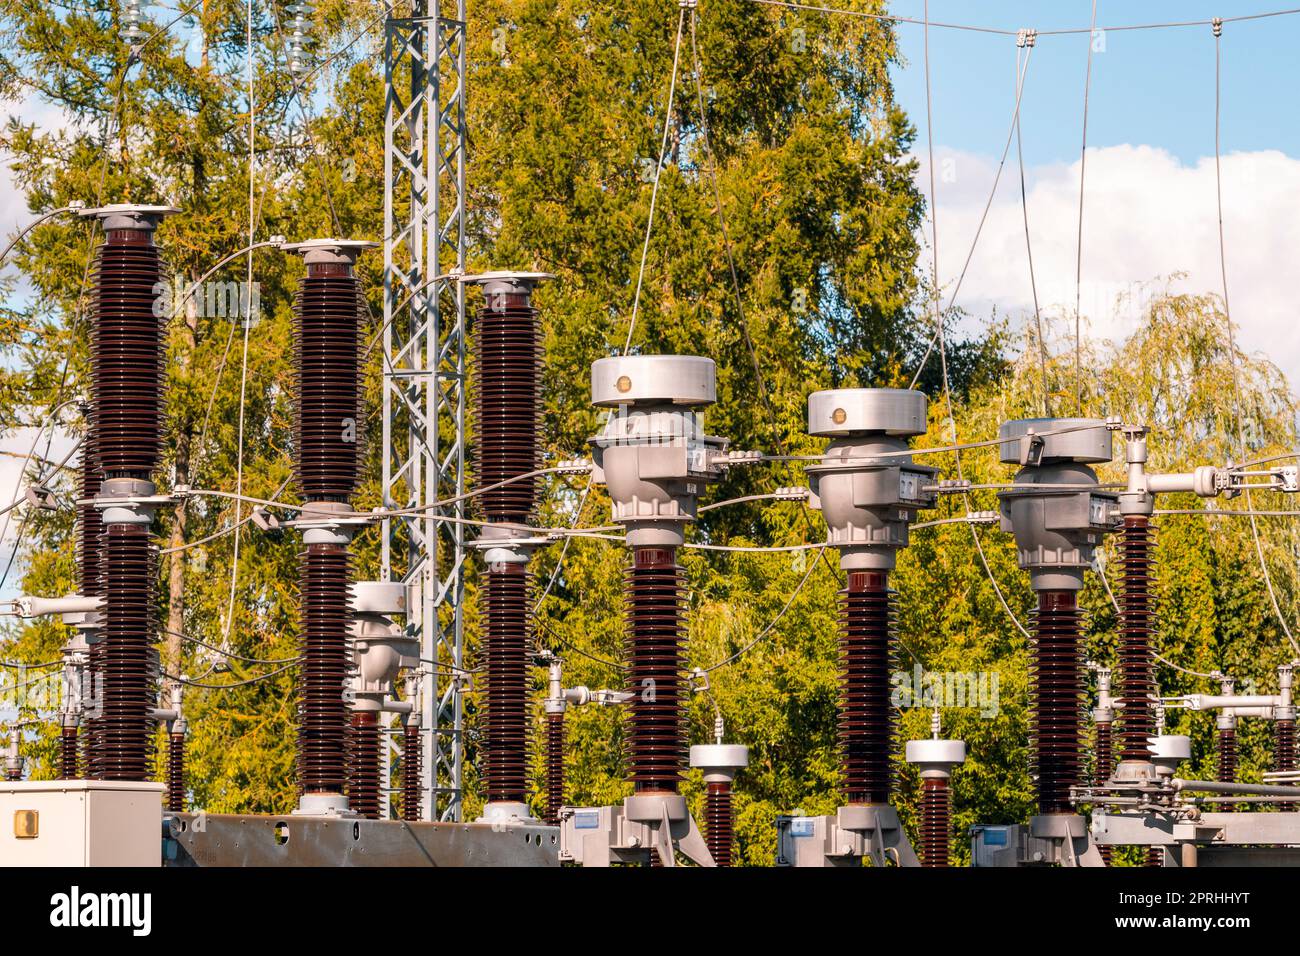 Transmission line field in a transformer station Stock Photo